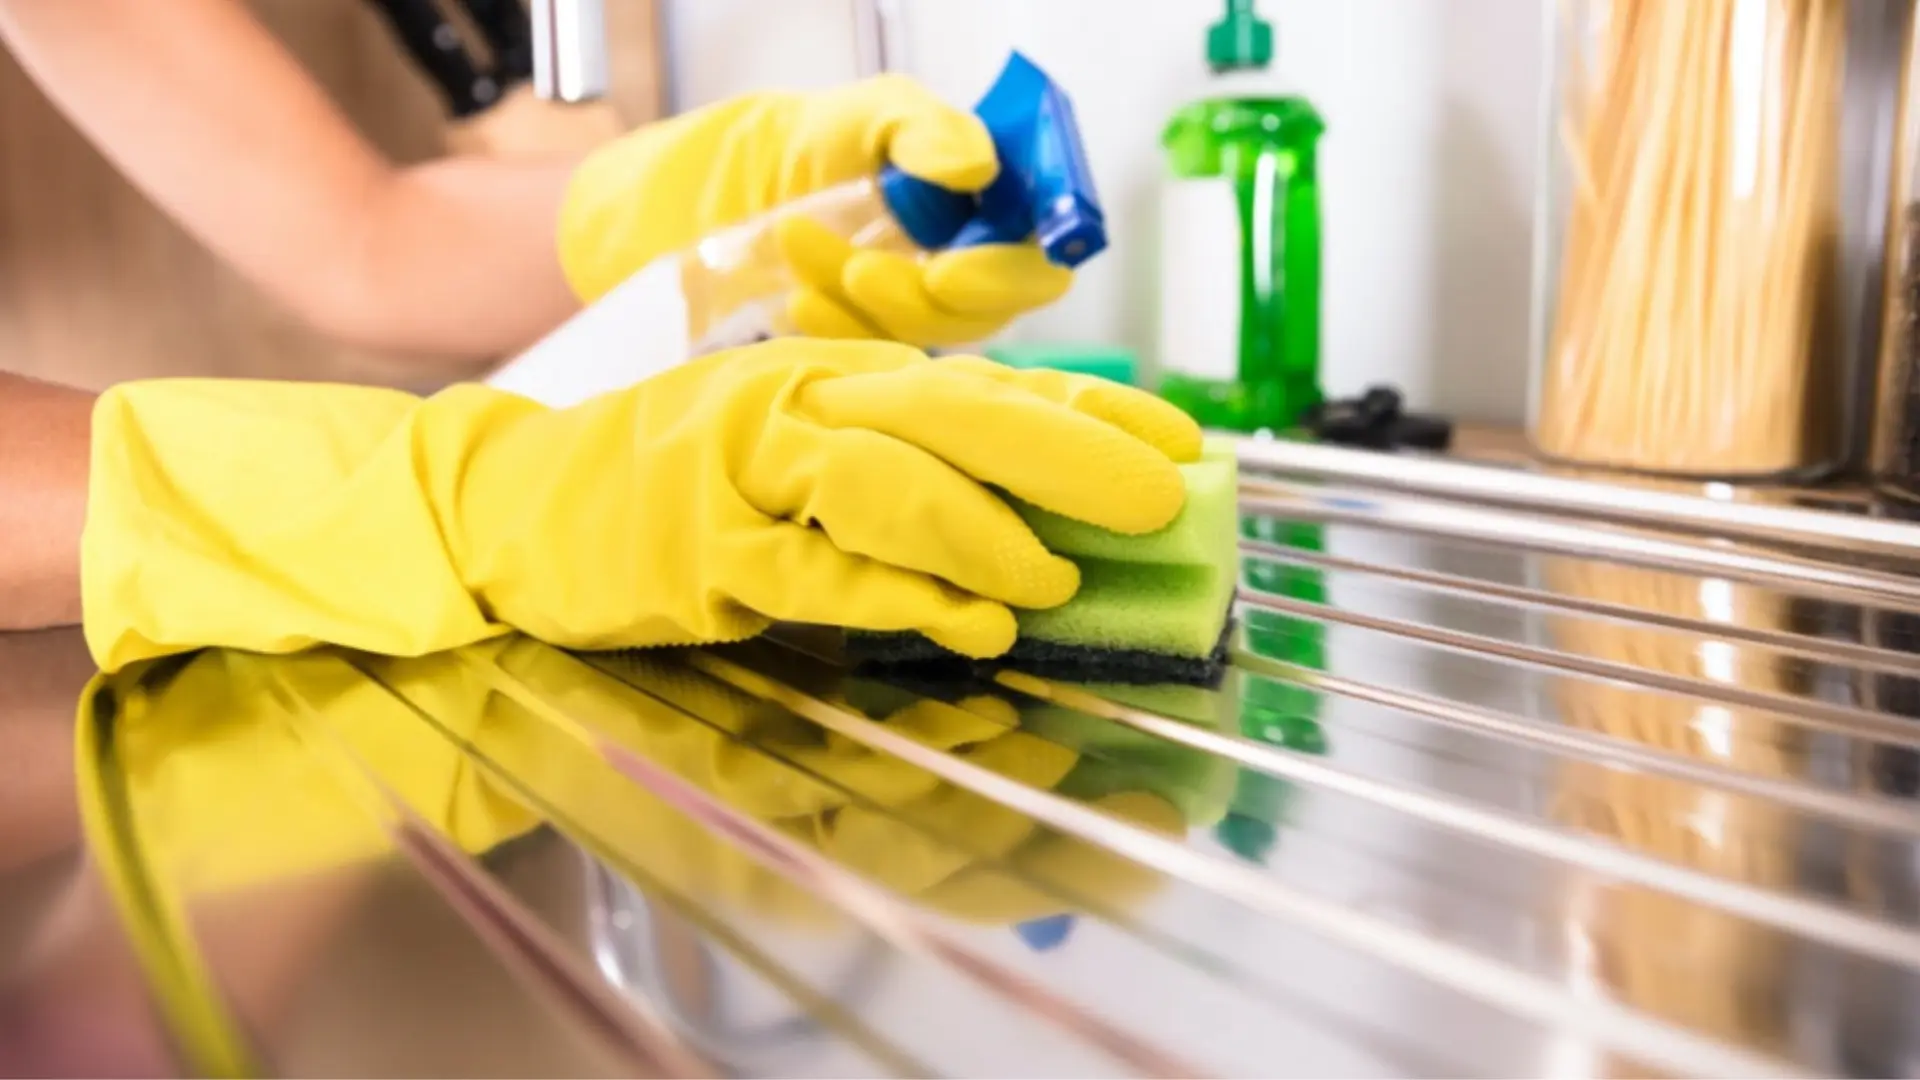 Routine Stainless Steel Cleaning